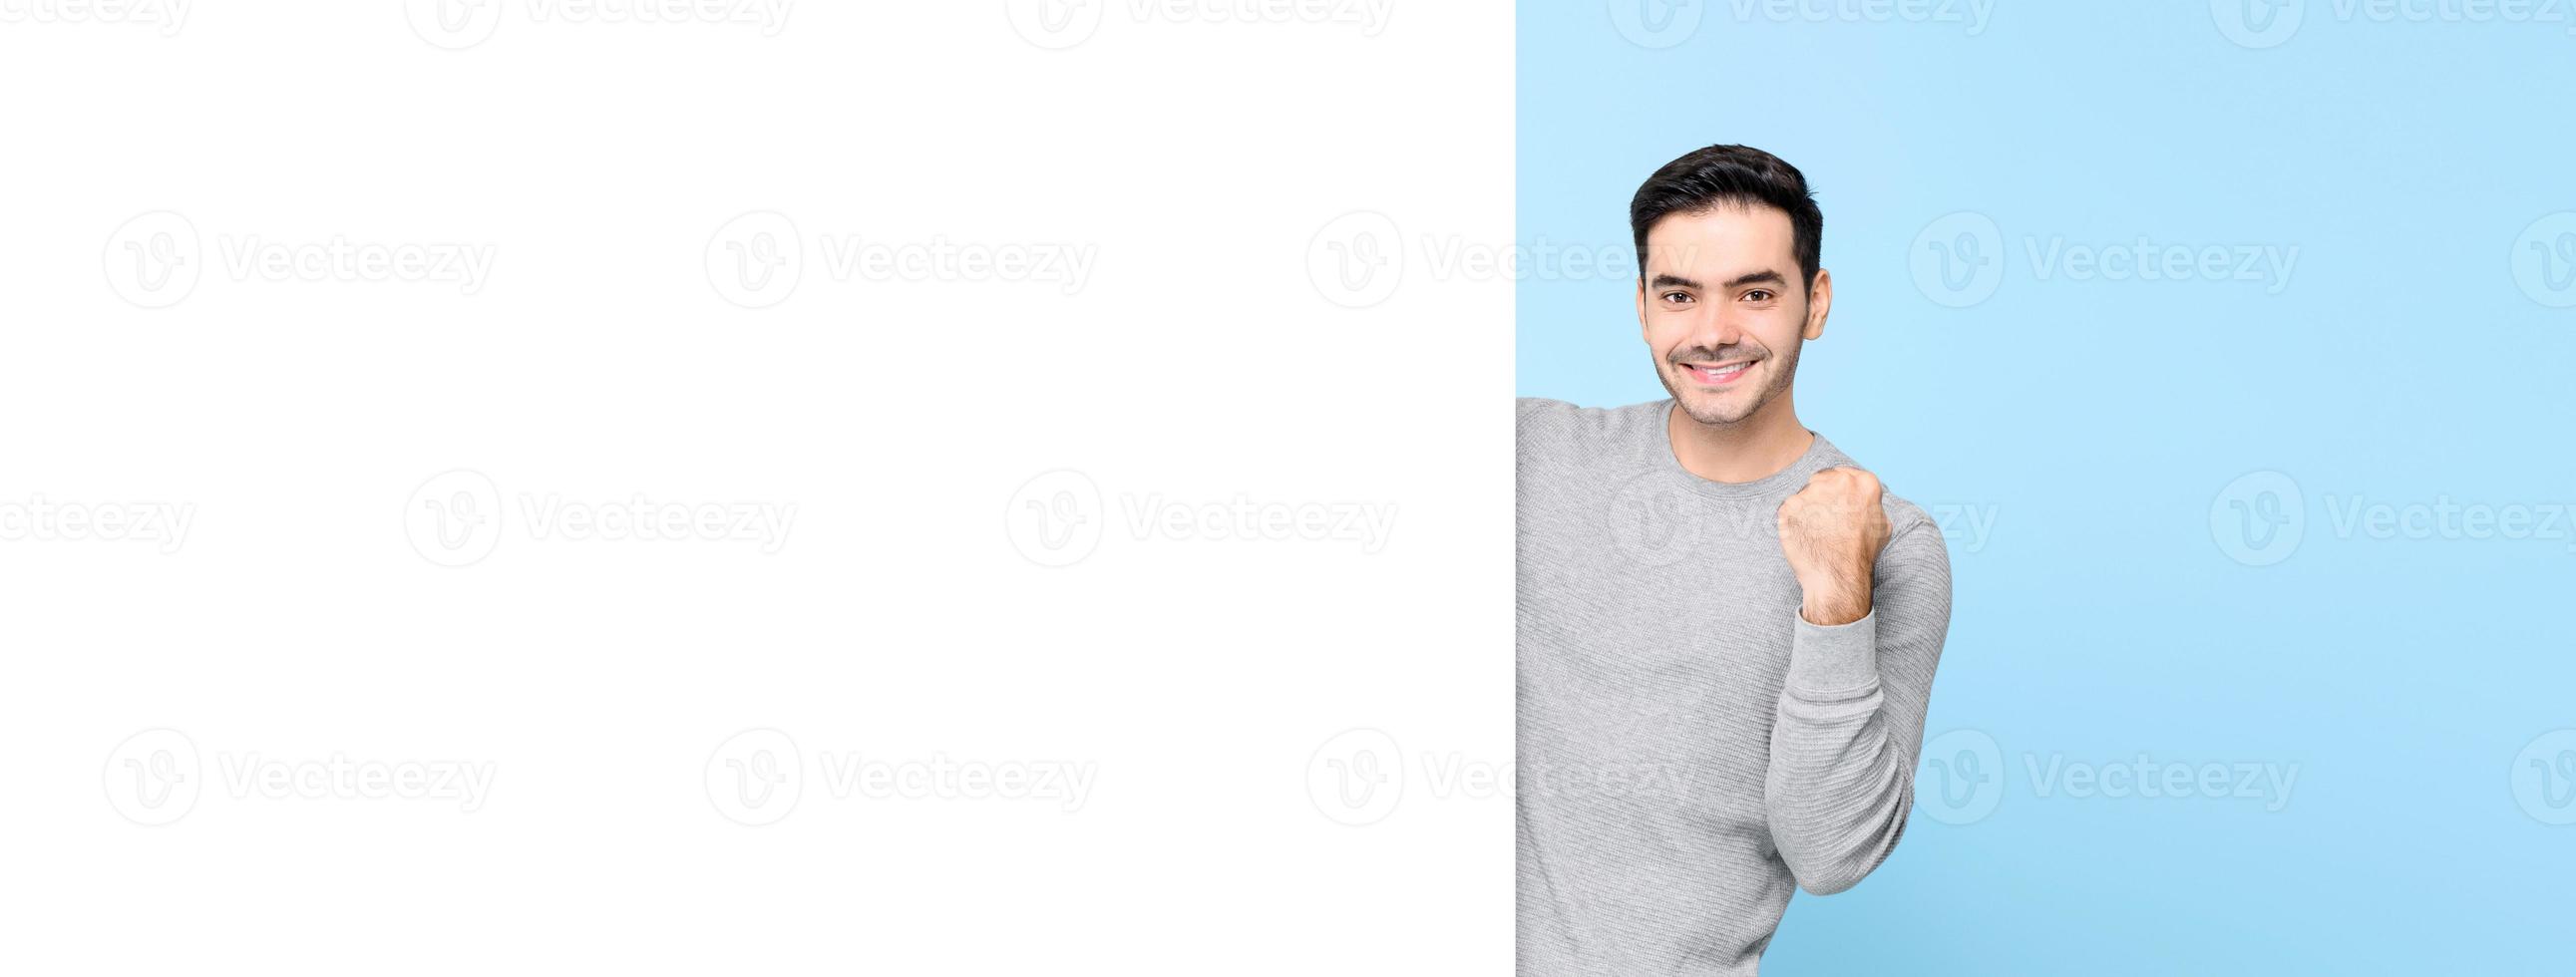 Smiling handsome Caucasian man raising fist behind empty white board on light blue banner background photo